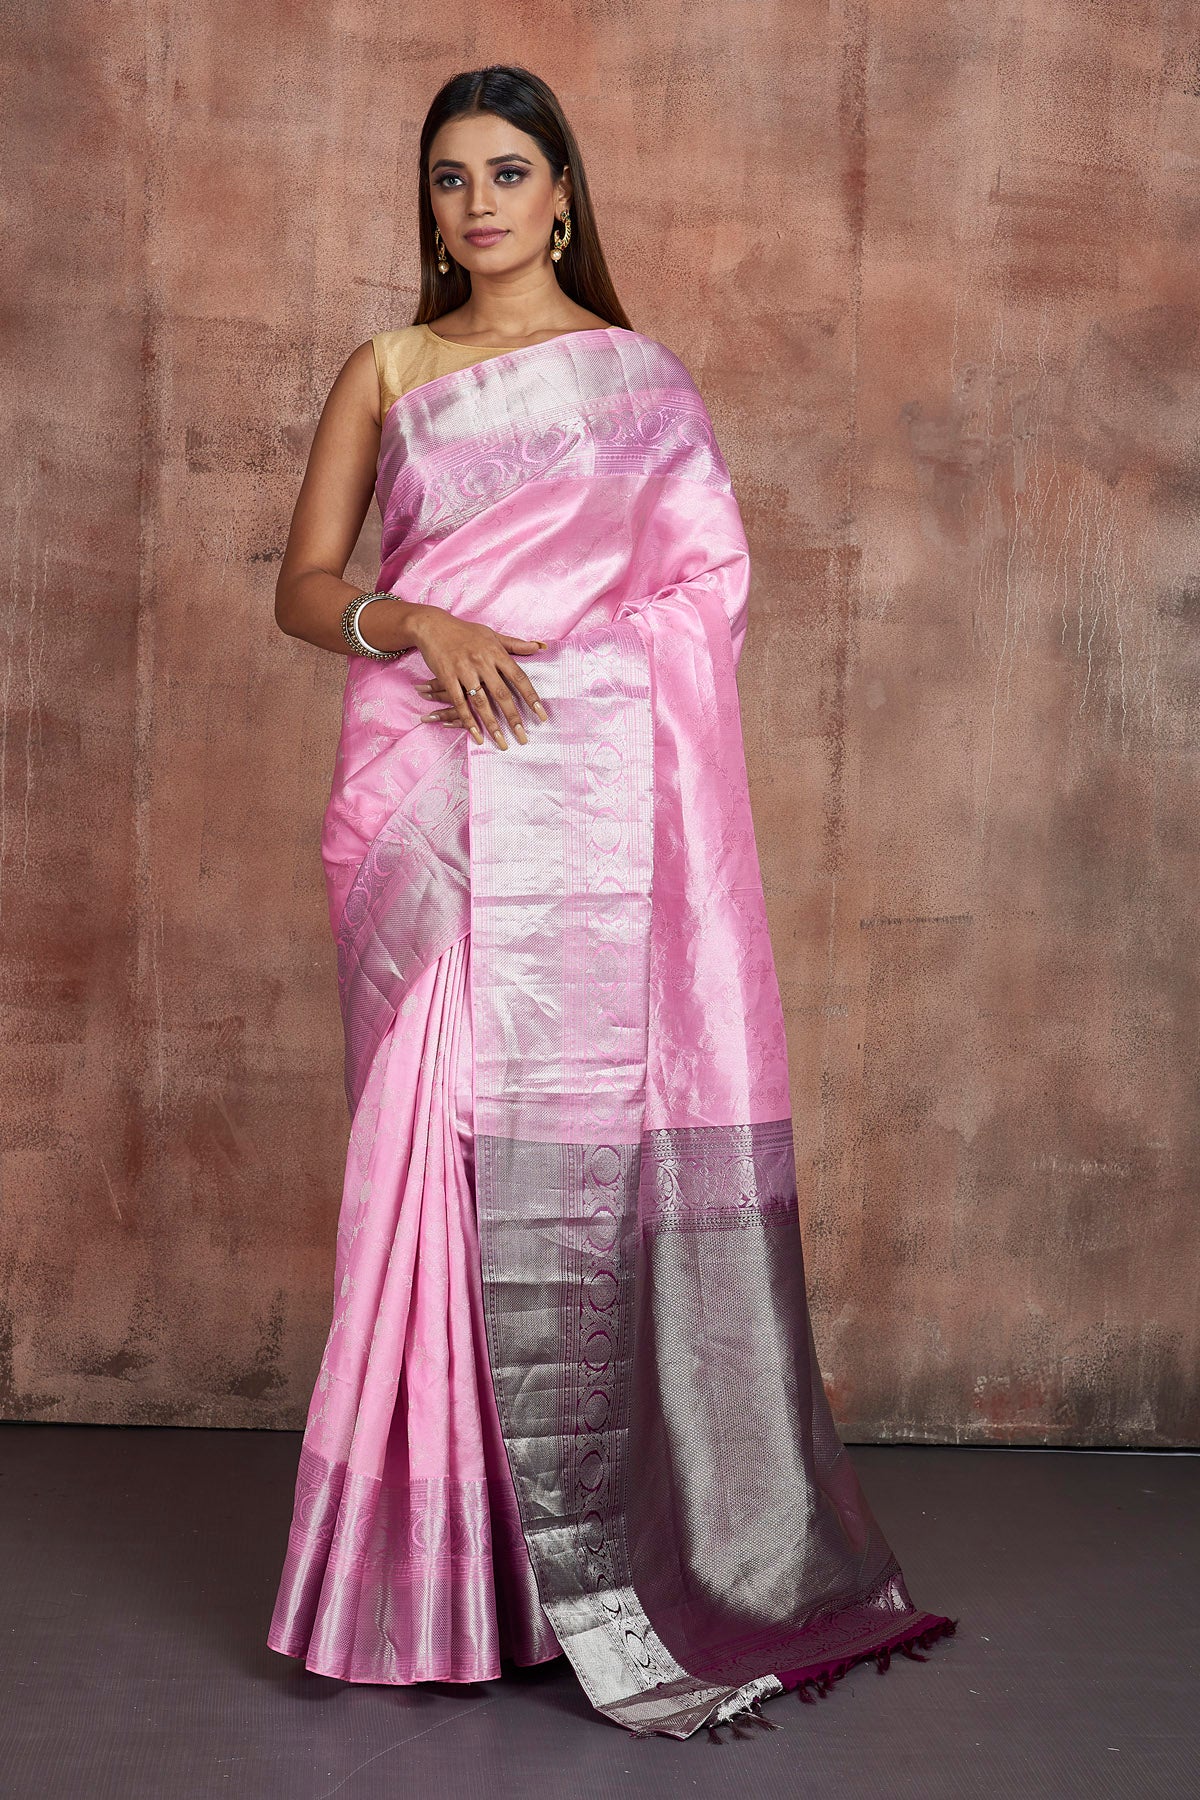 Beautiful Silver Zari work Border Peach Kanchipuram Soft Silk Saree Fo -  Blouse piece:Yes, the saree comes up with a Blouse piece of 0.8 meters.  This saree is new beautiful Design By